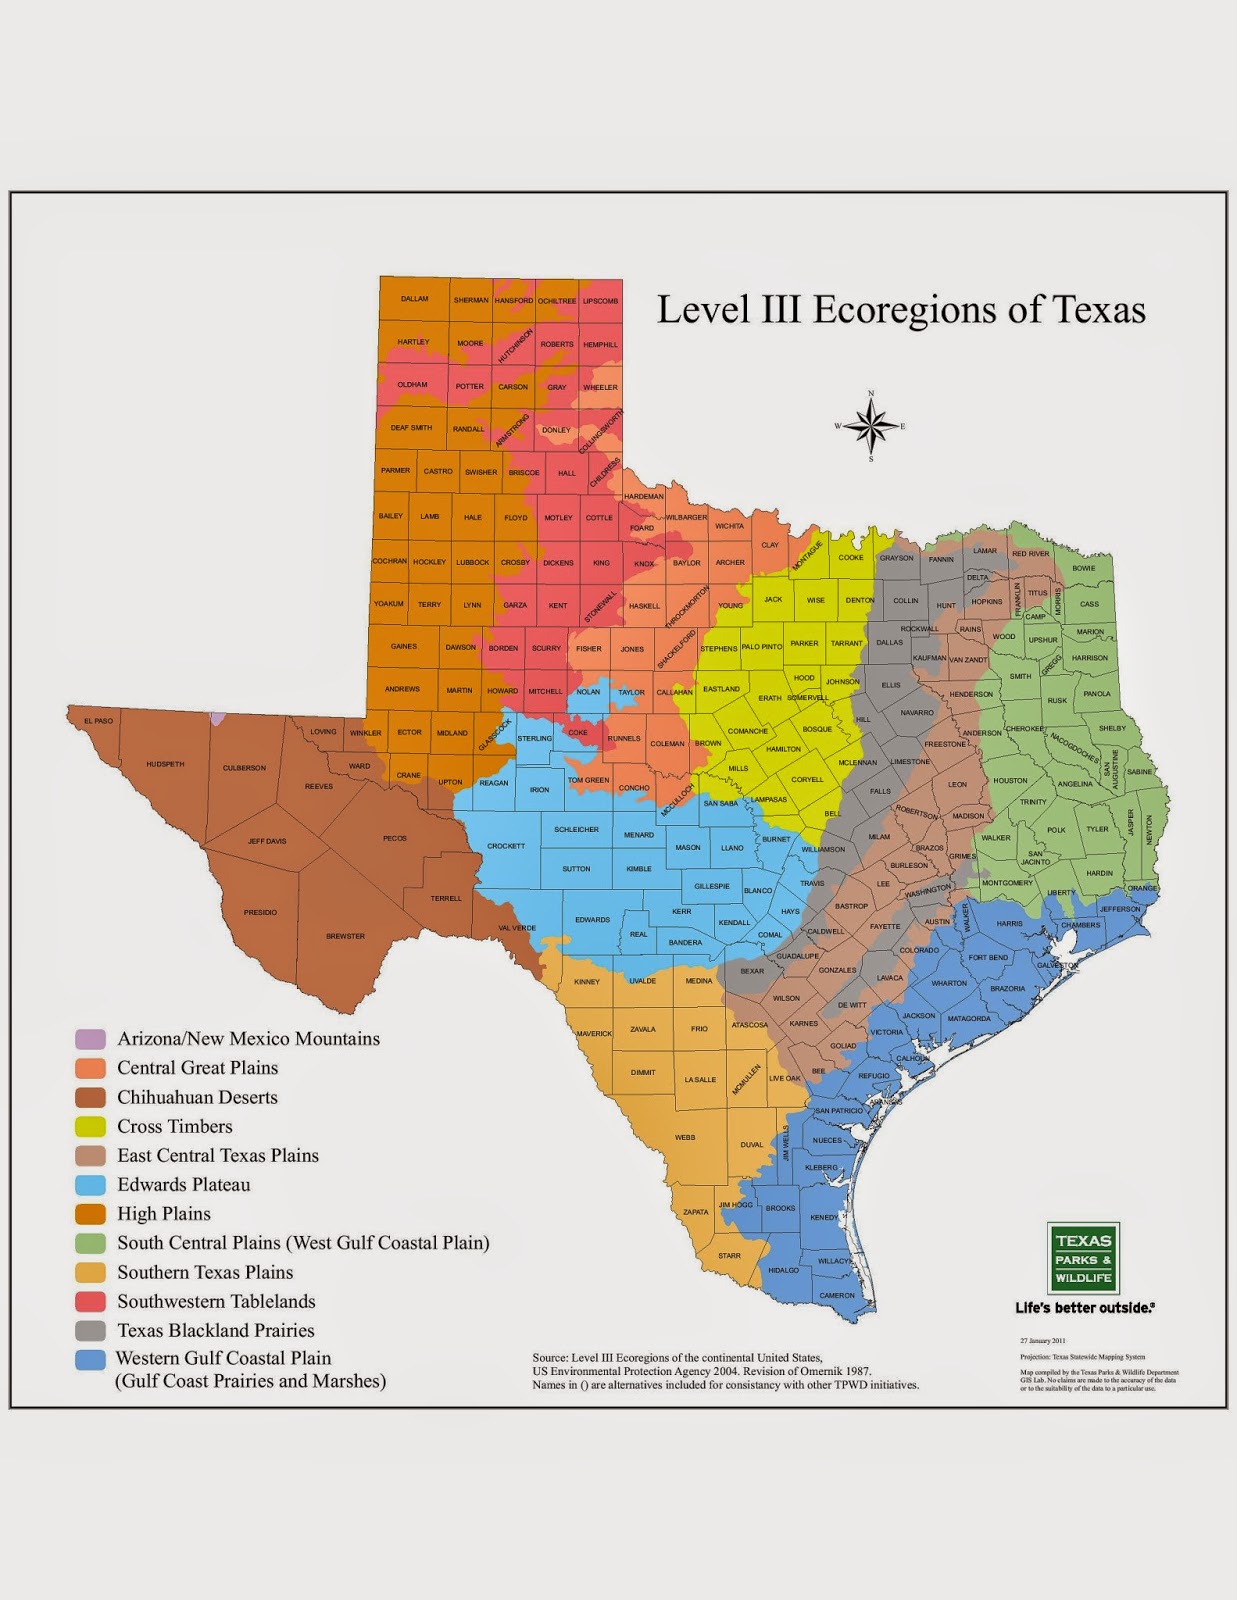 The Regions and Counties of Texas